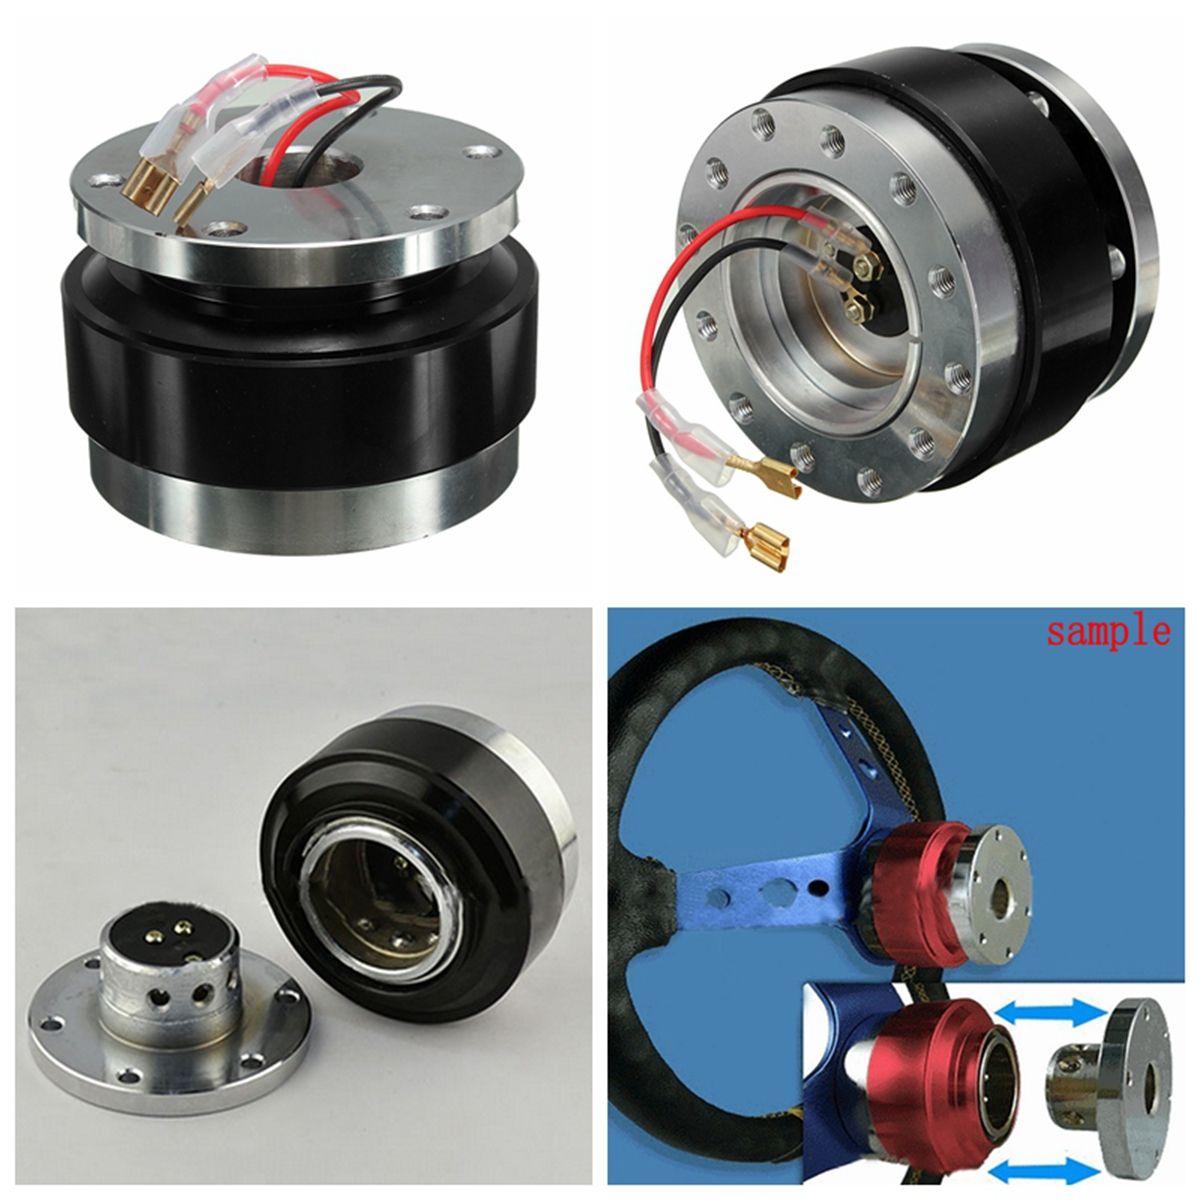 Universal-Car-Auto-Steel-Ring-Wheel-Quick-Release-Hub-Adapter-Snap-Off-Boss-Kit-1010604